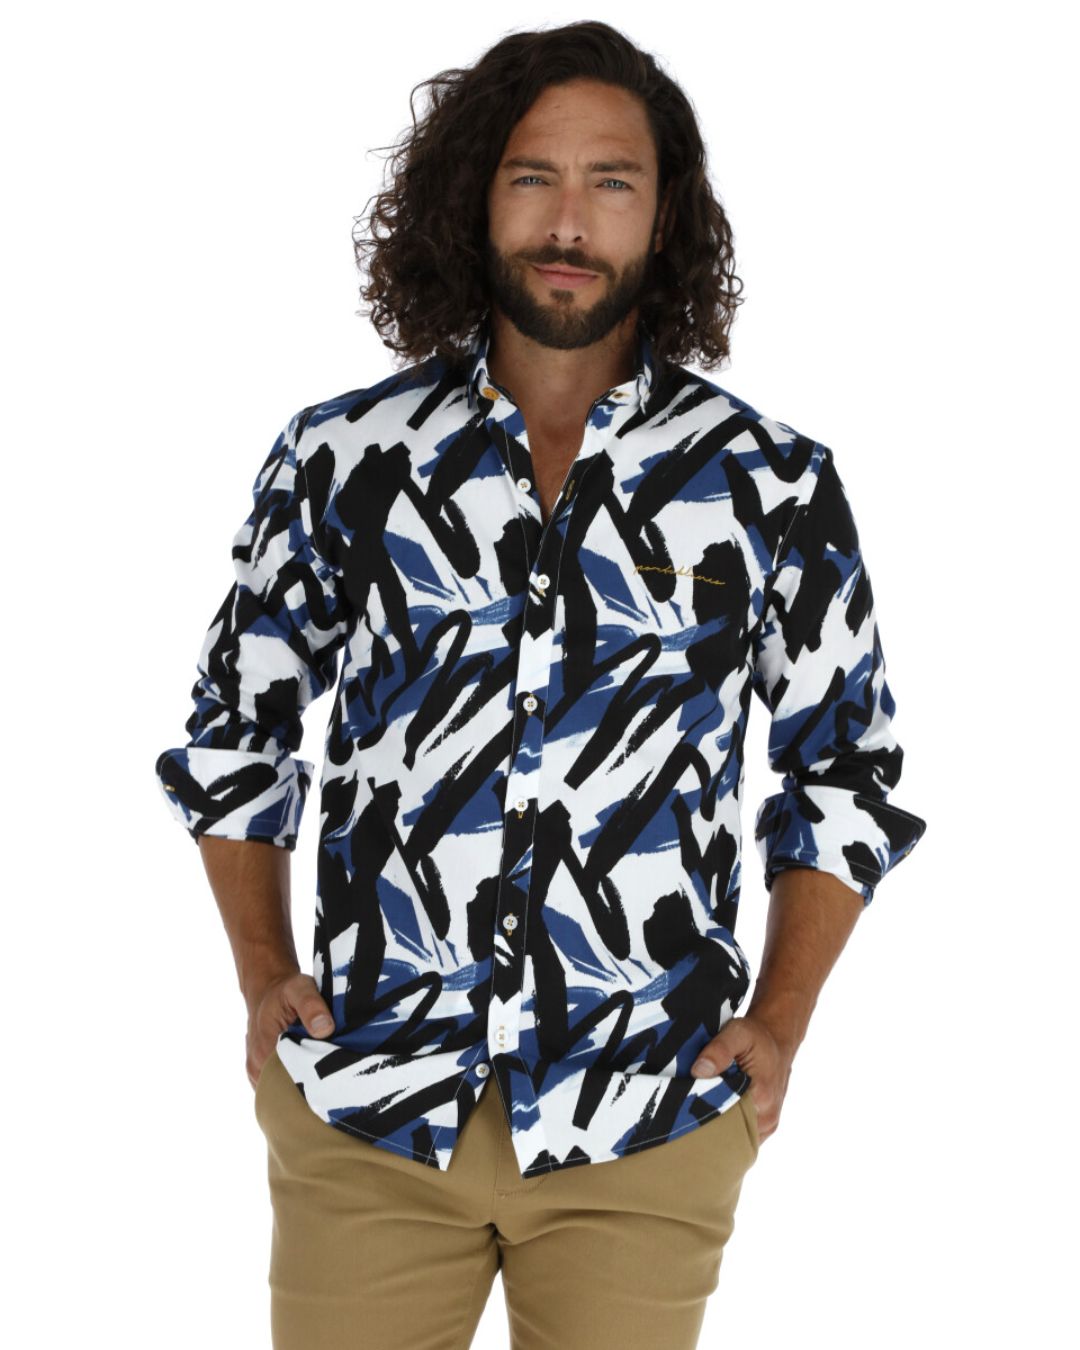 Men's Abstract Long Sleeve Button Down Shirt Black White & Blue